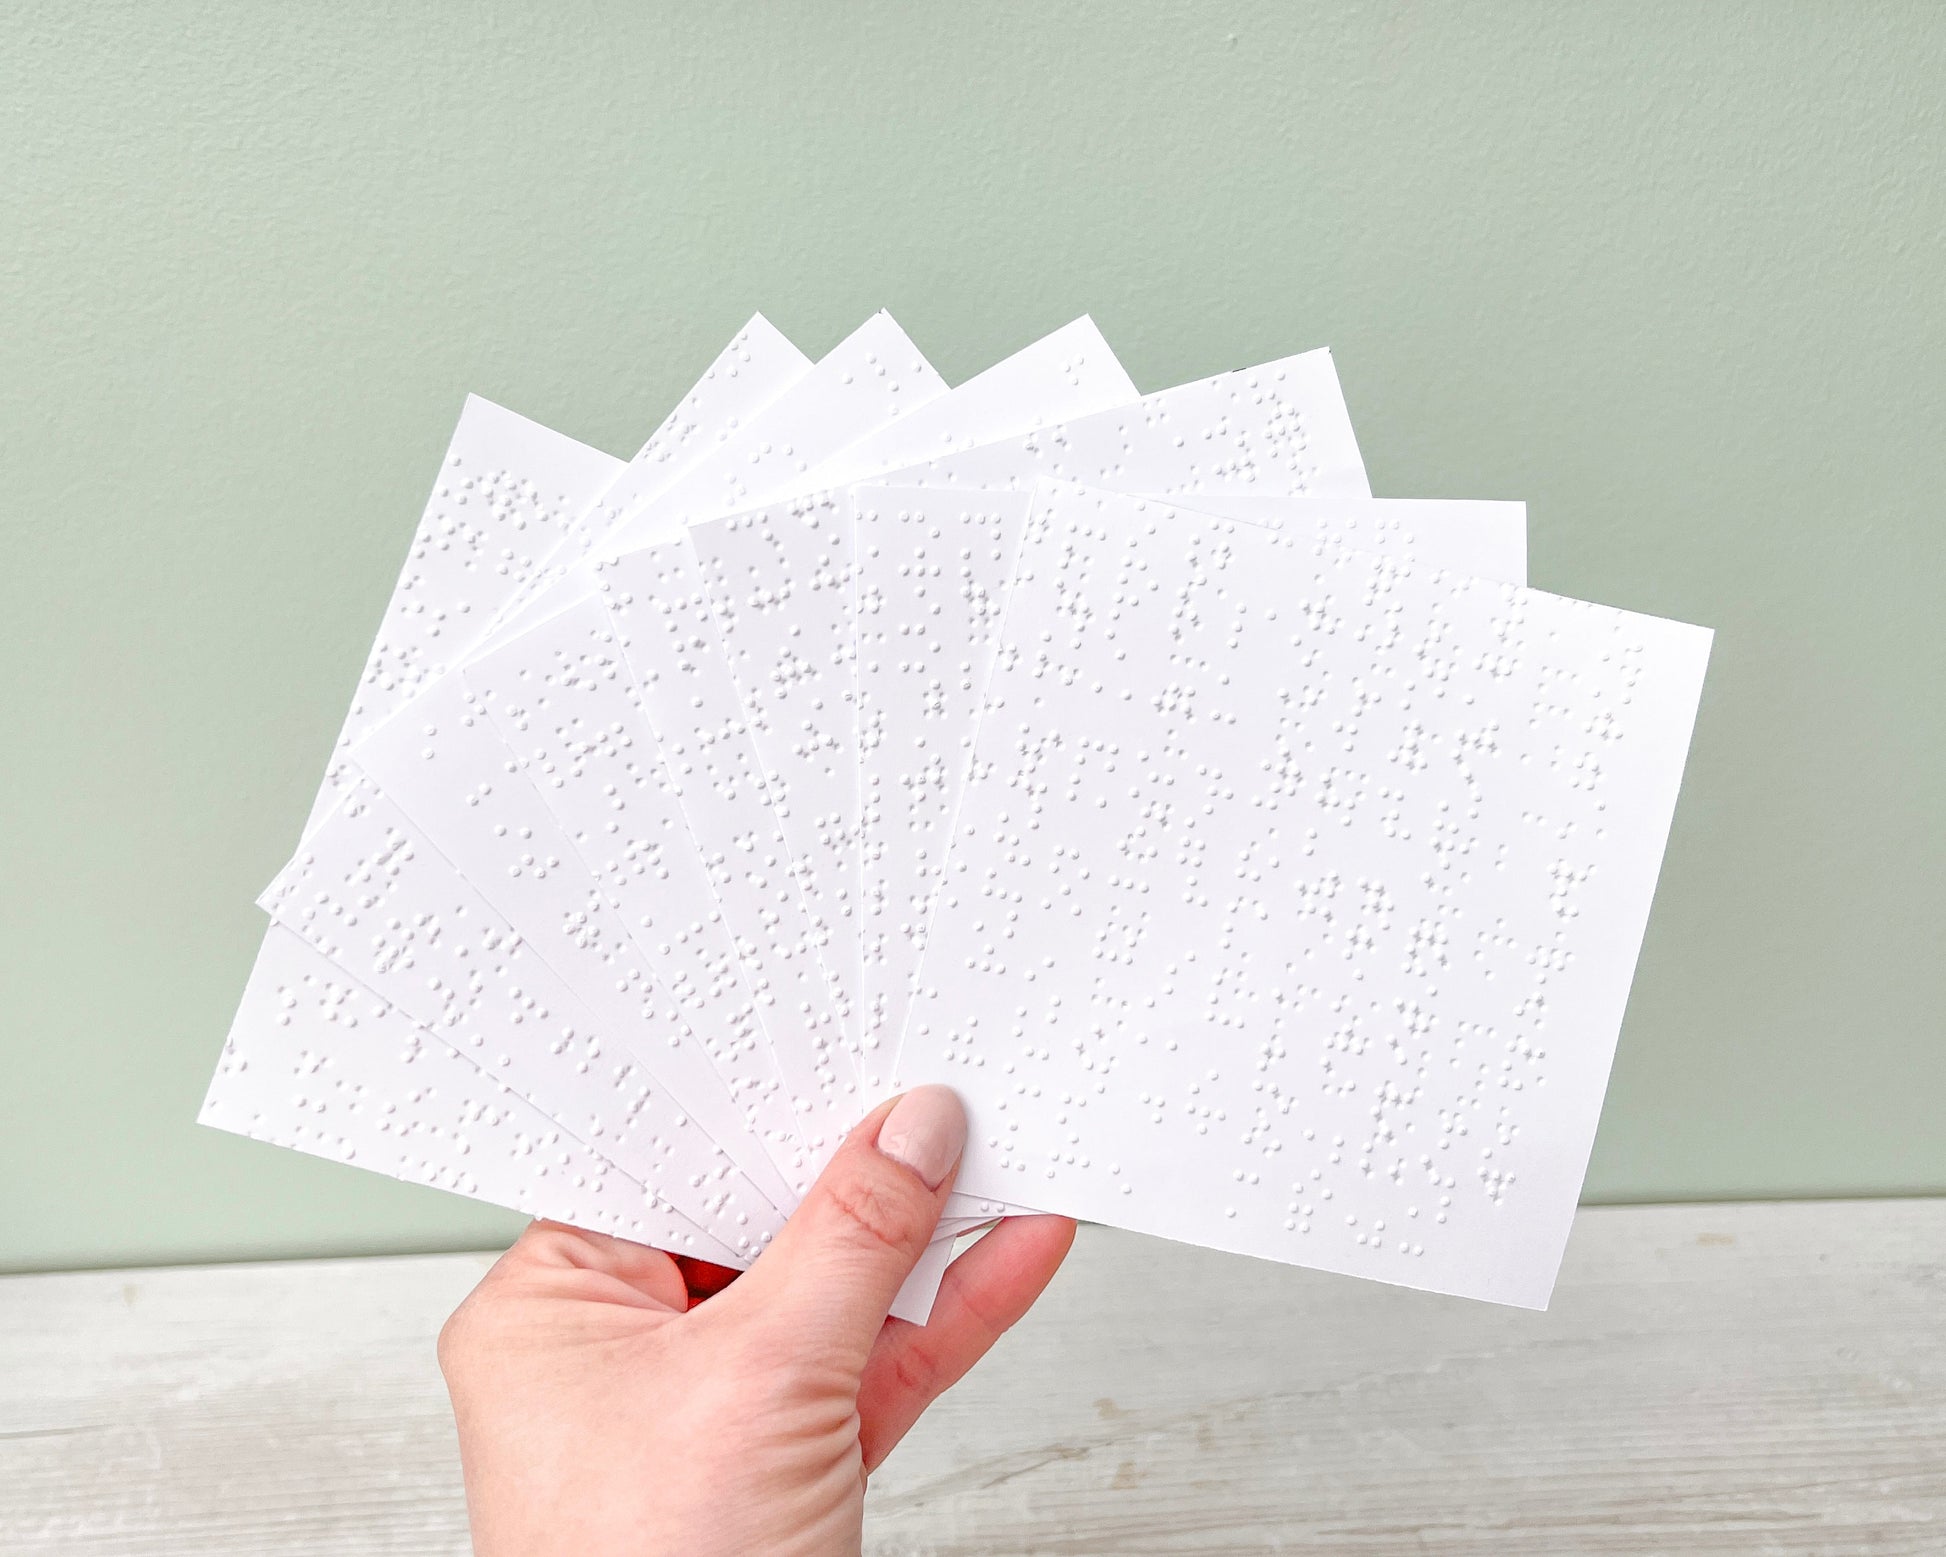 A hand holding 8 sheets of braille paper, approx. 11 x 11cm each.